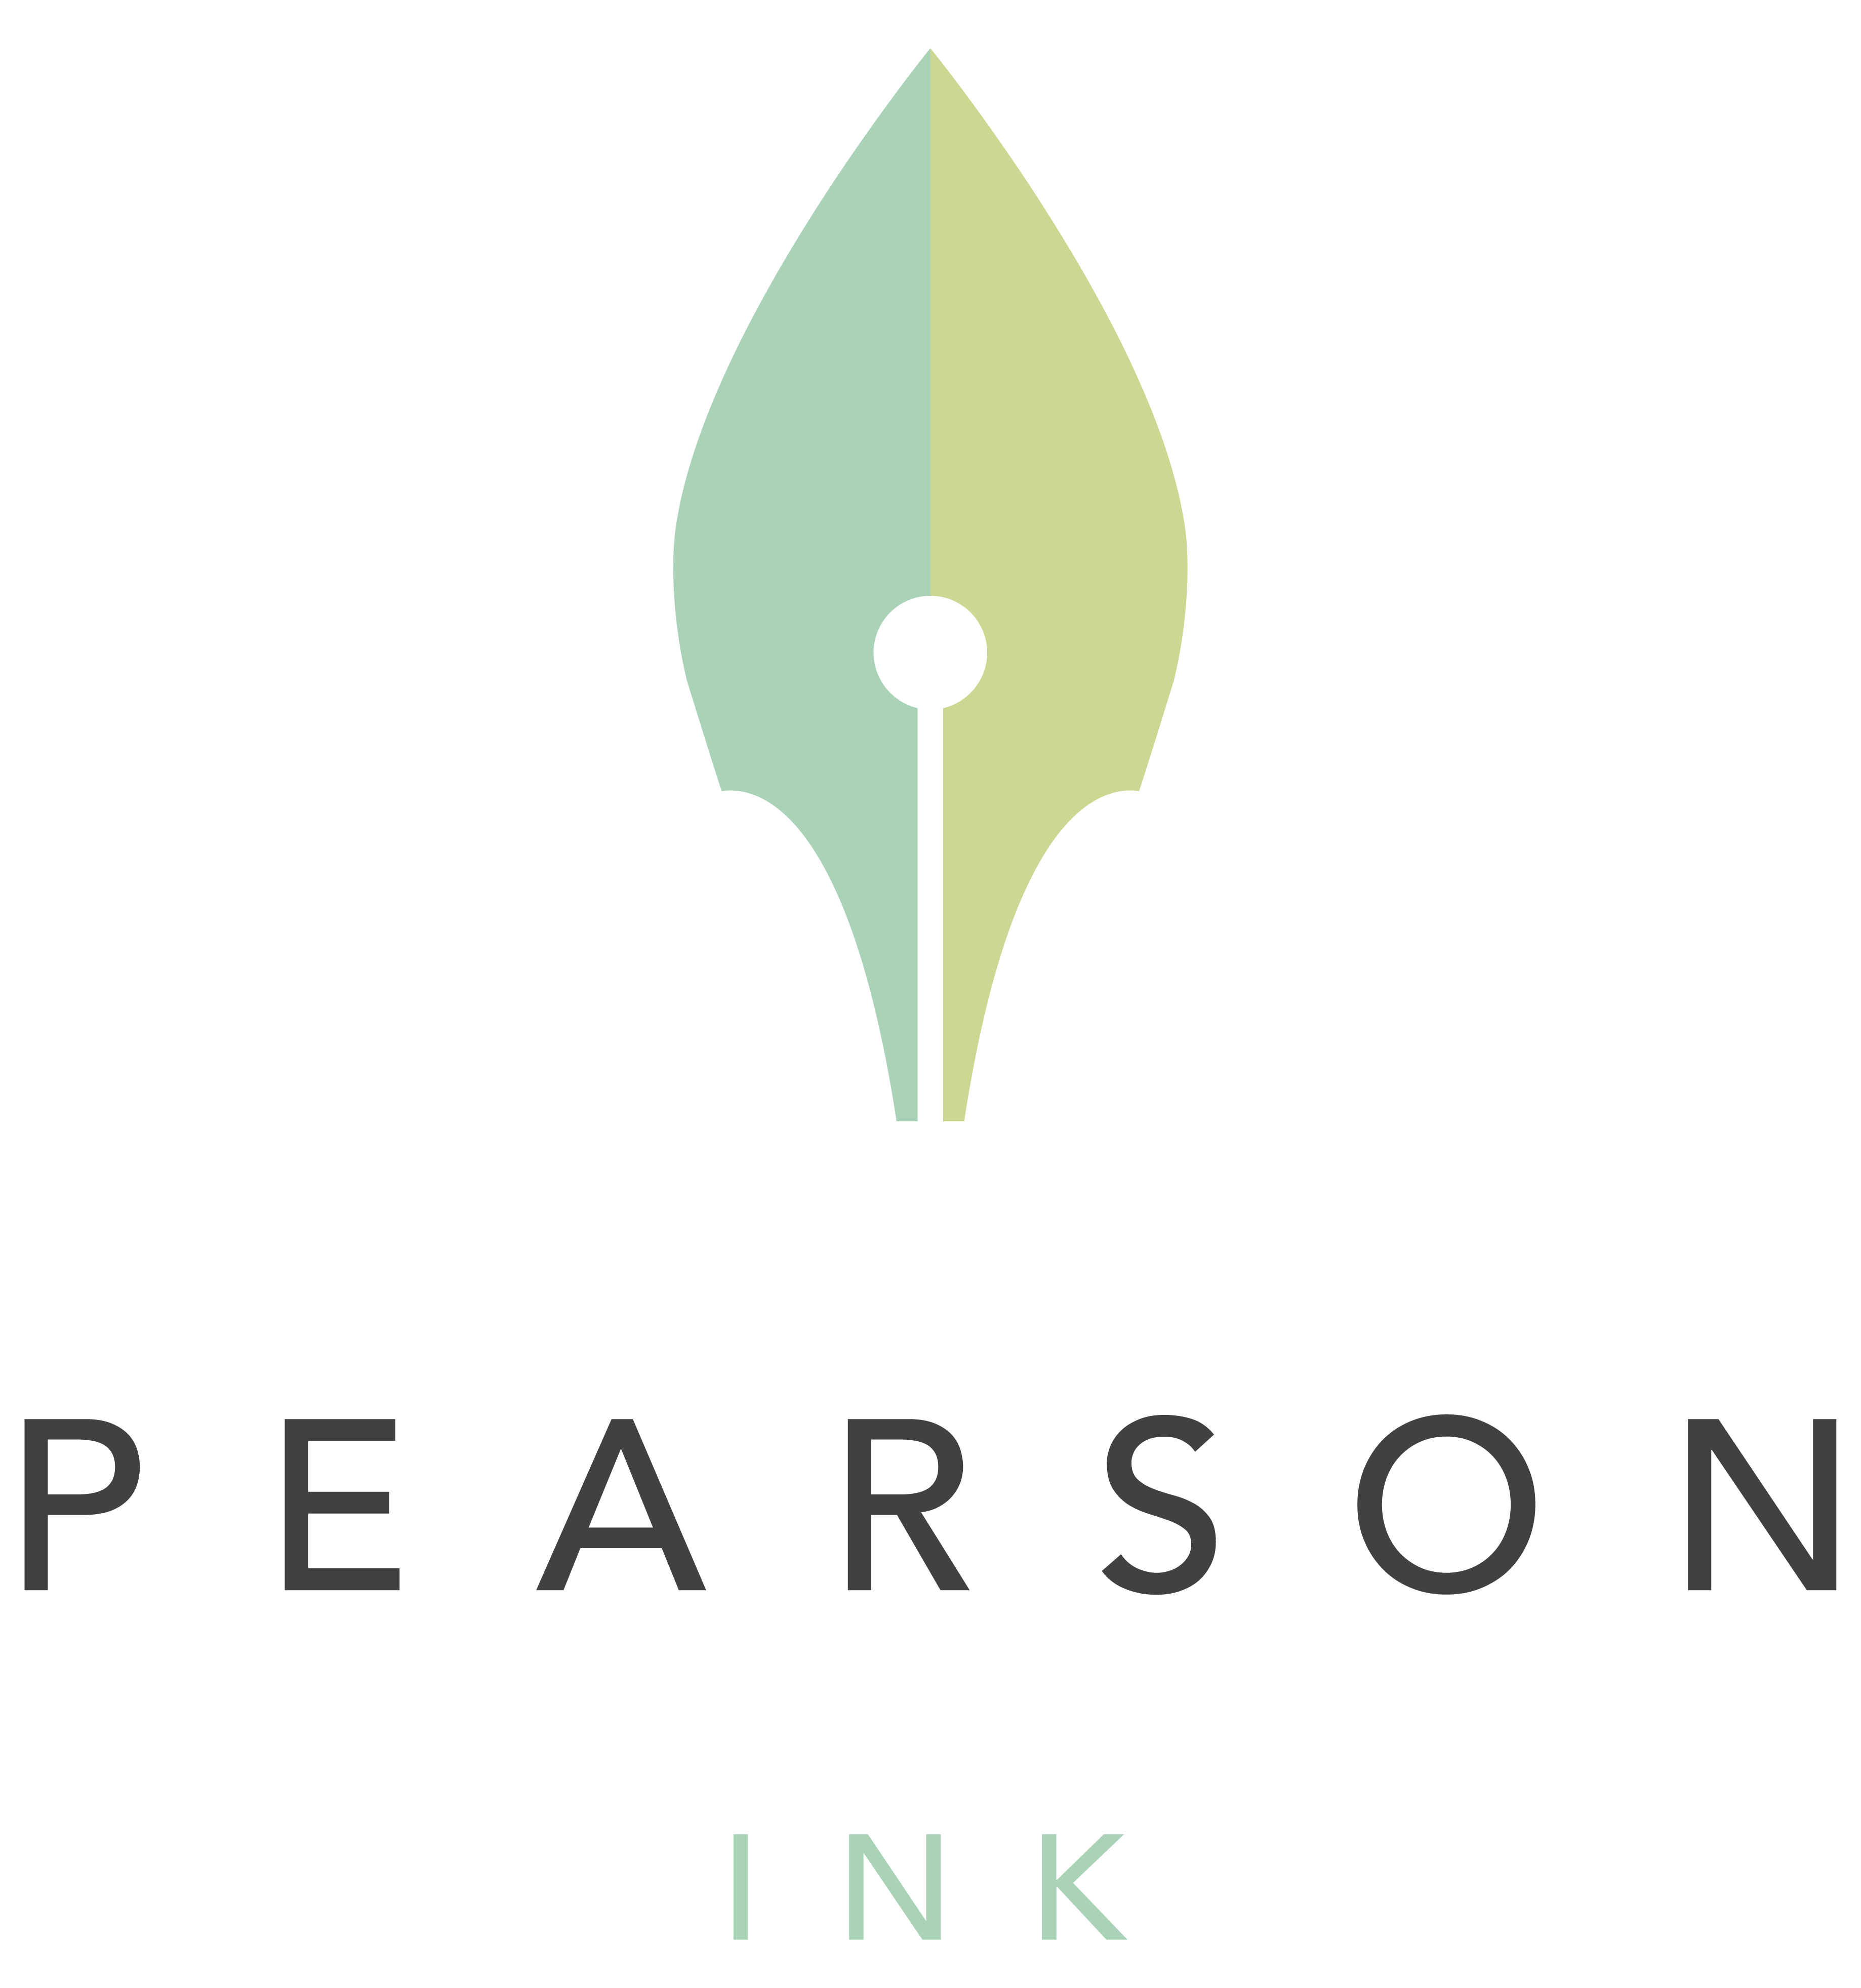 Pearson Ink